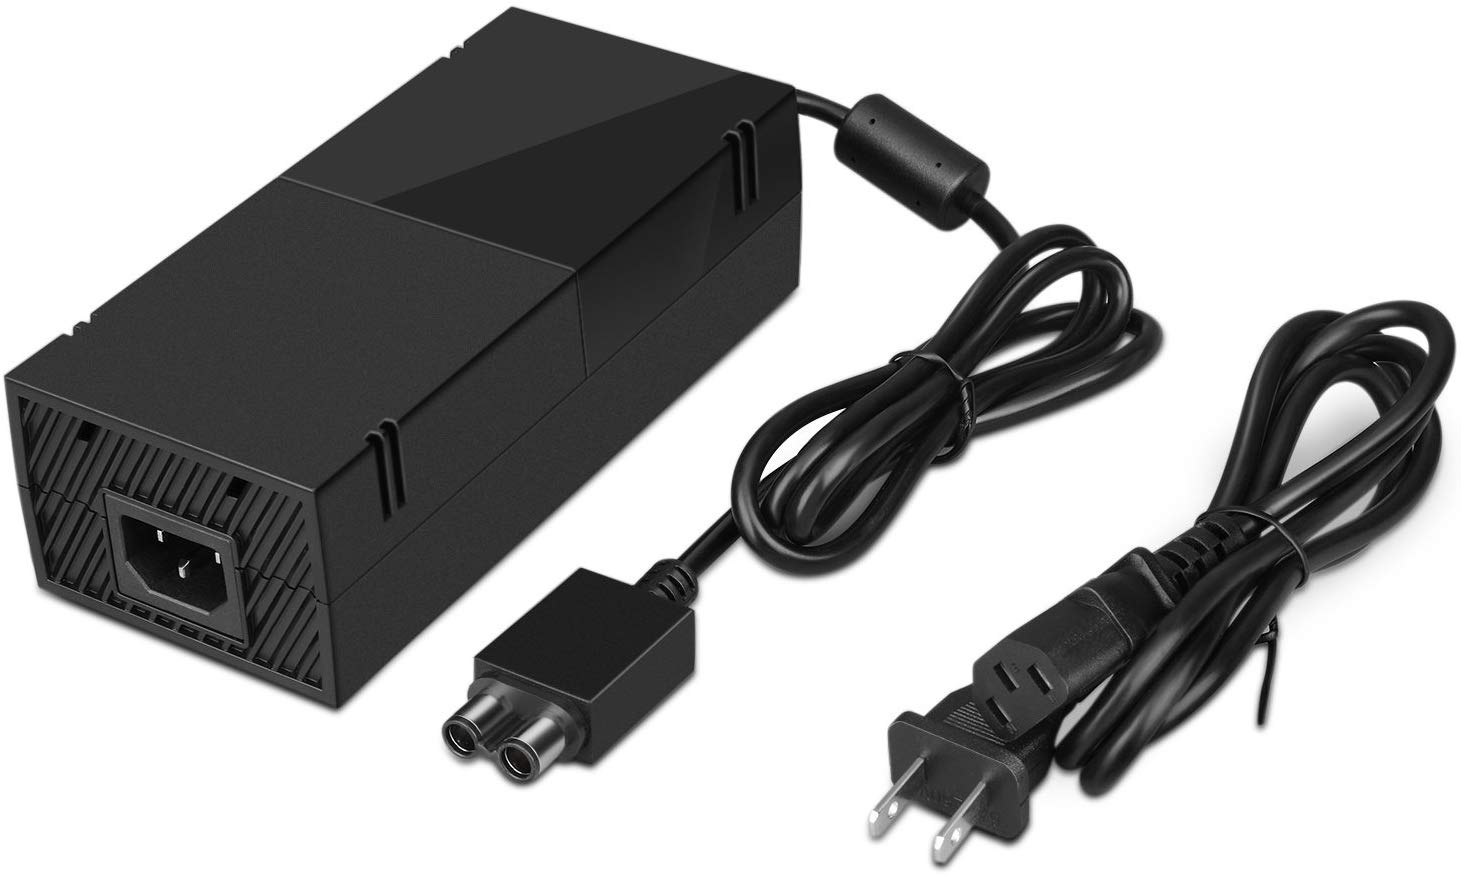 TNP Xbox One Power Supply - Replacement US Standard AC Charger Adapter Charging Cord Cable Accessory 12V 135W Power Brick 100-240V with LED Indicator for Xbox One Gaming Console Black